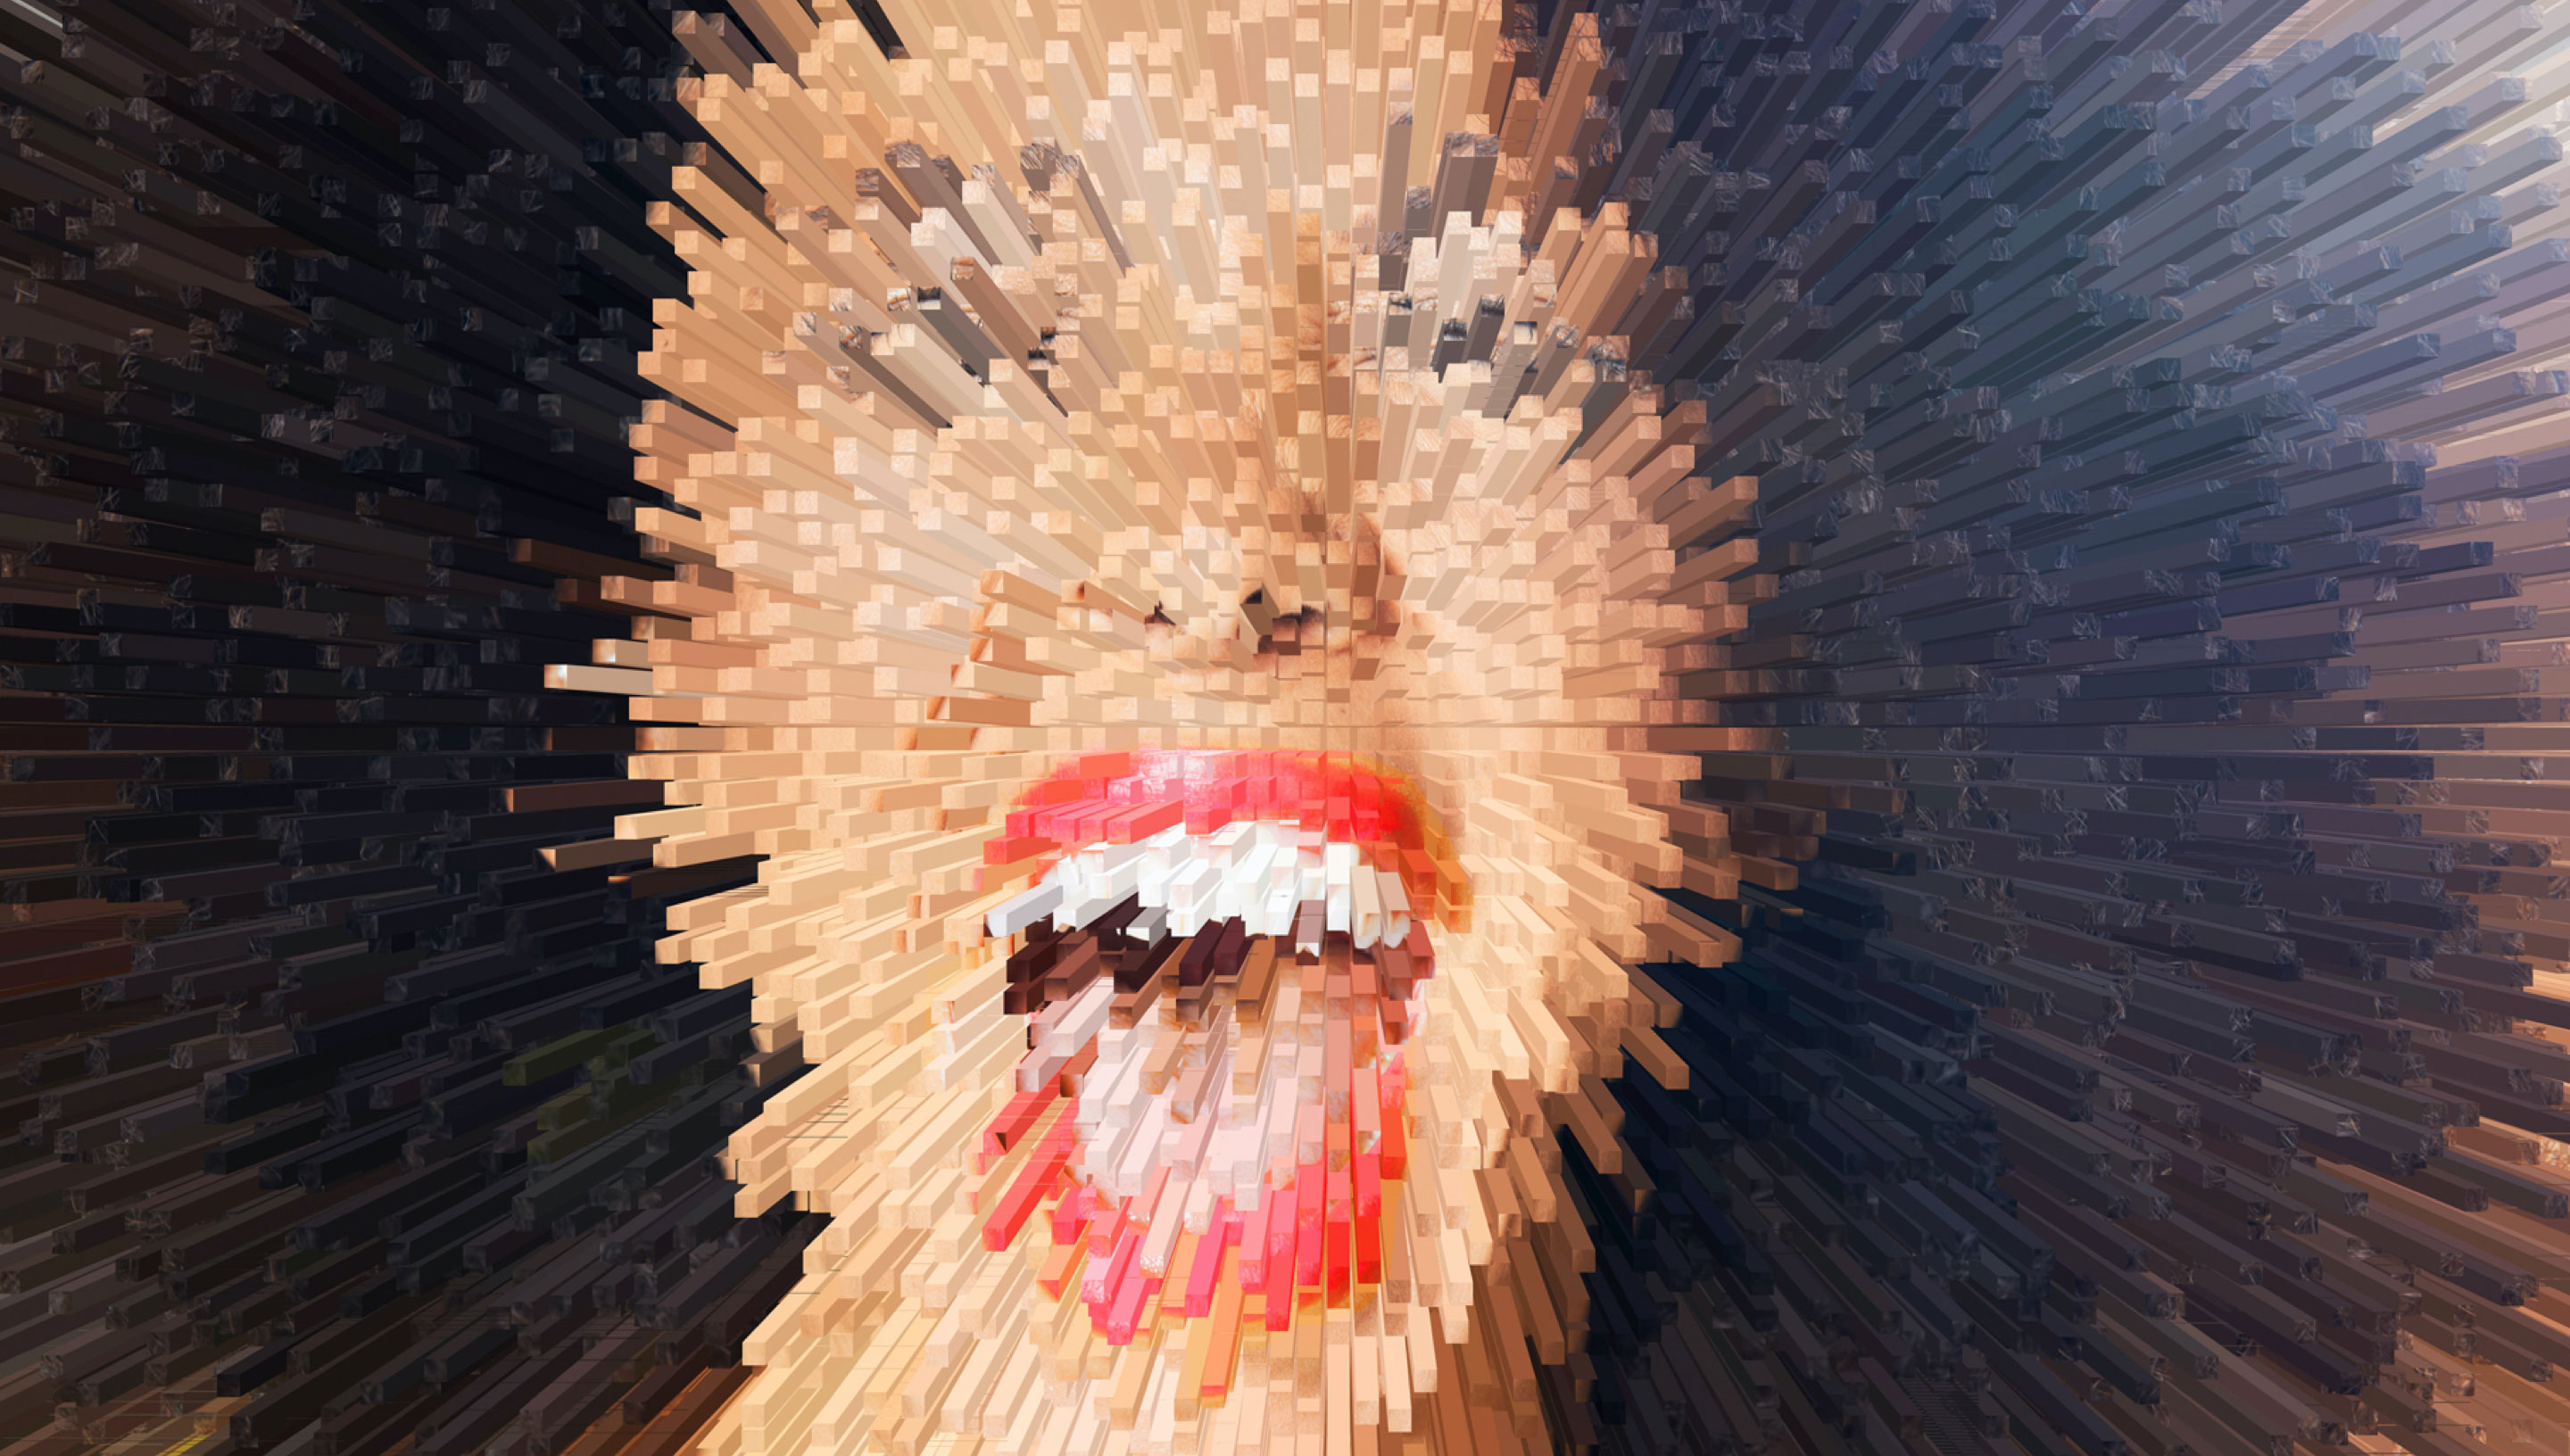 Pixelated image of a person’s face